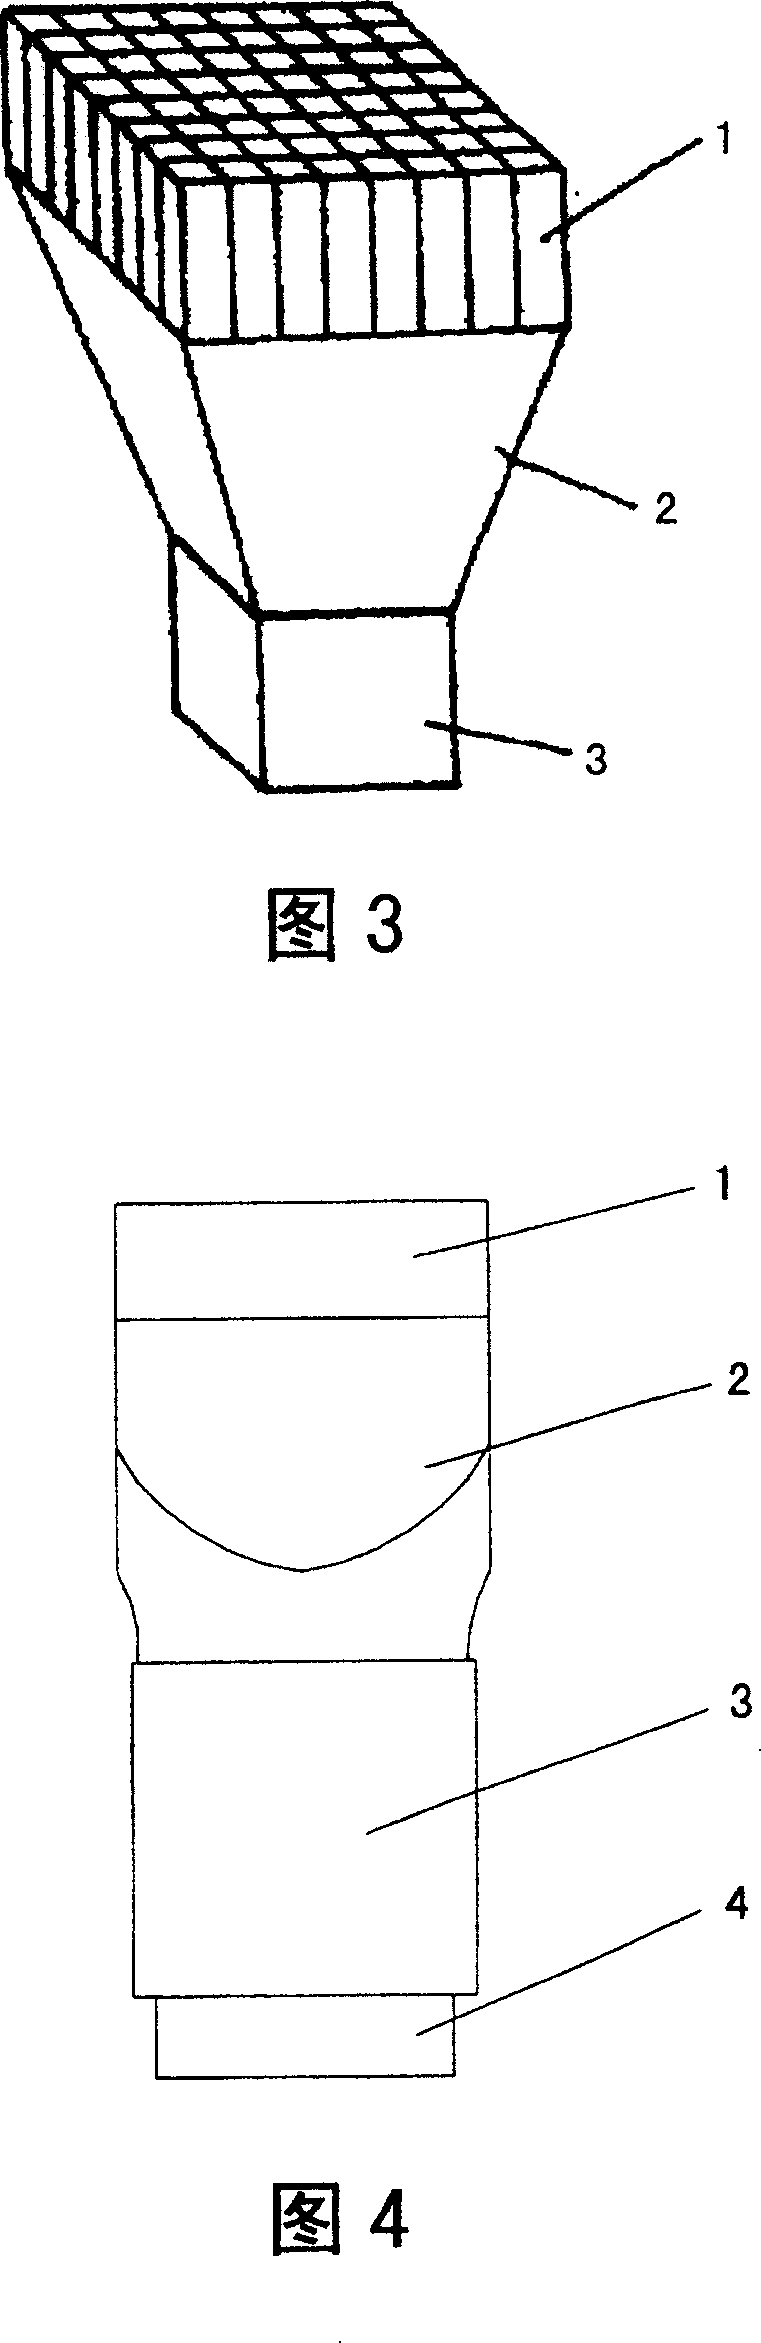 Flash detector for nuclear imaging device